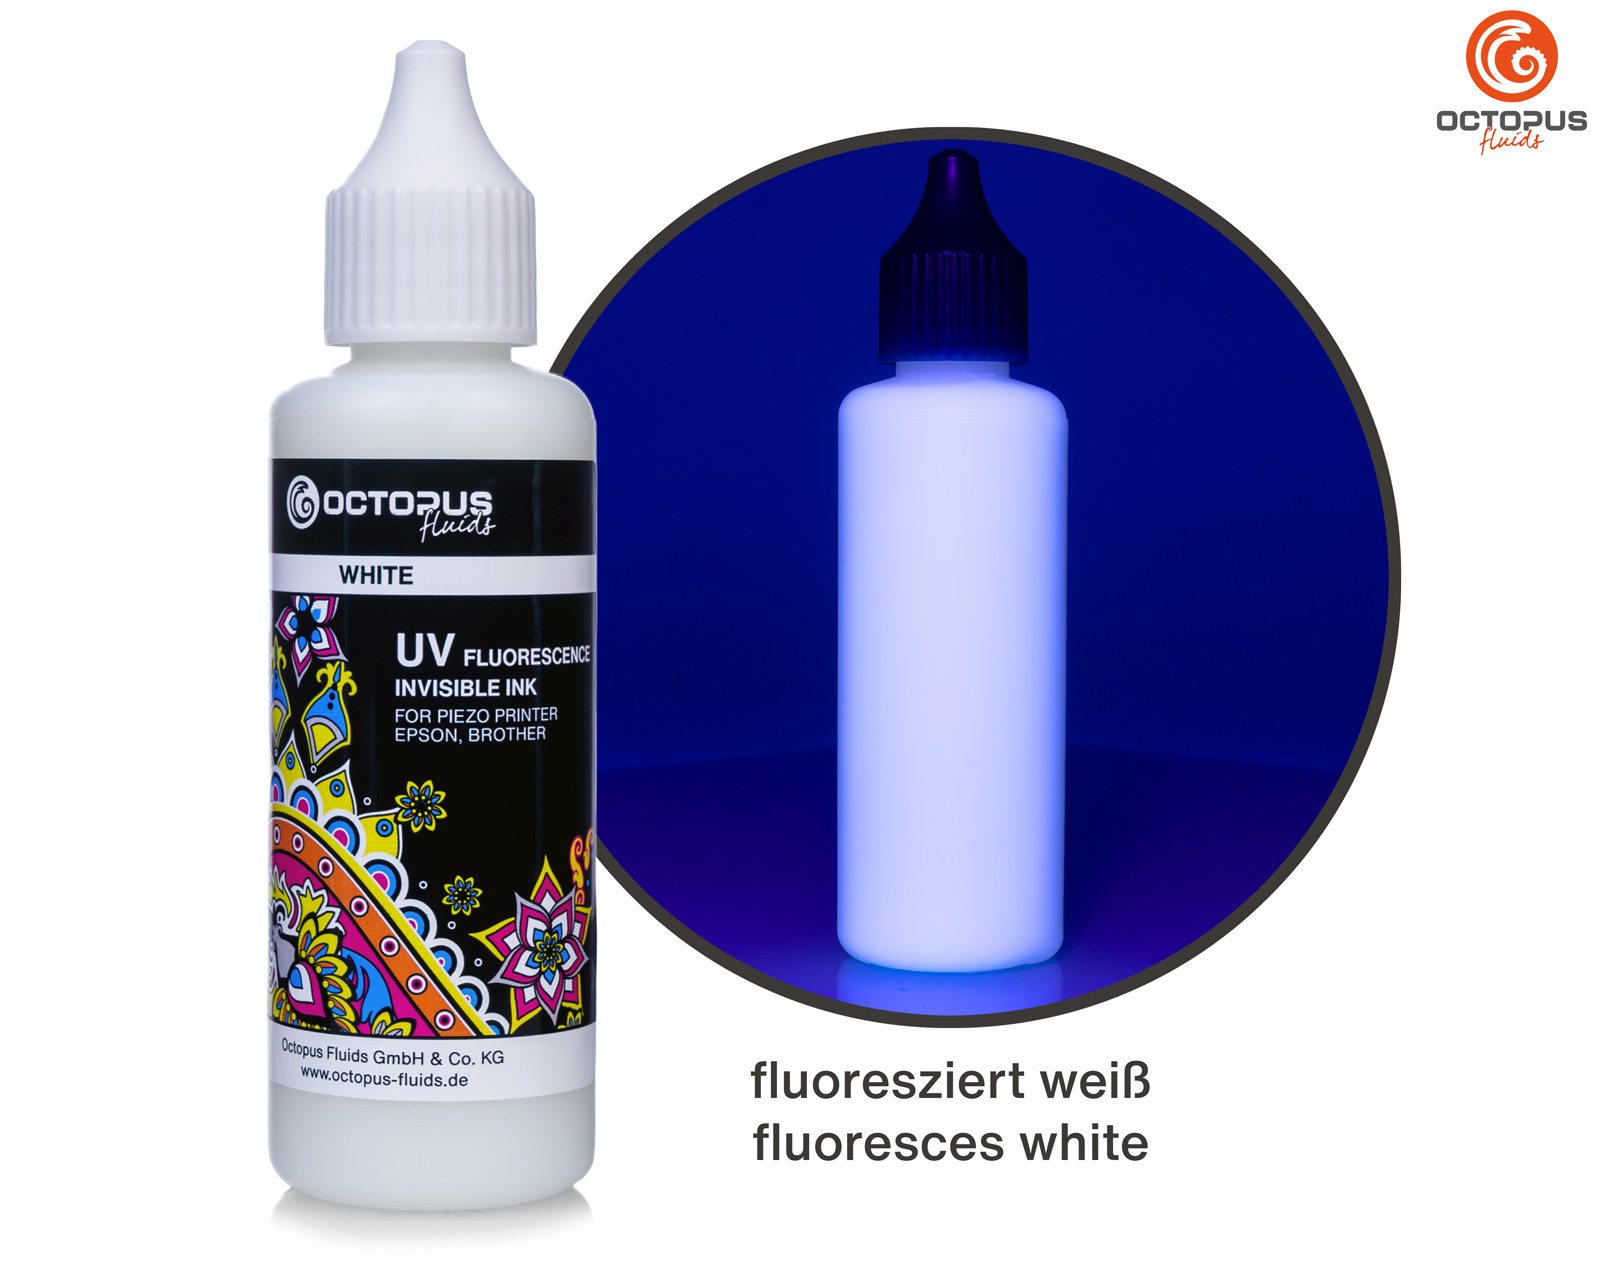 UV fluorescence invisible ink for piezo print heads Epson, Brother, white